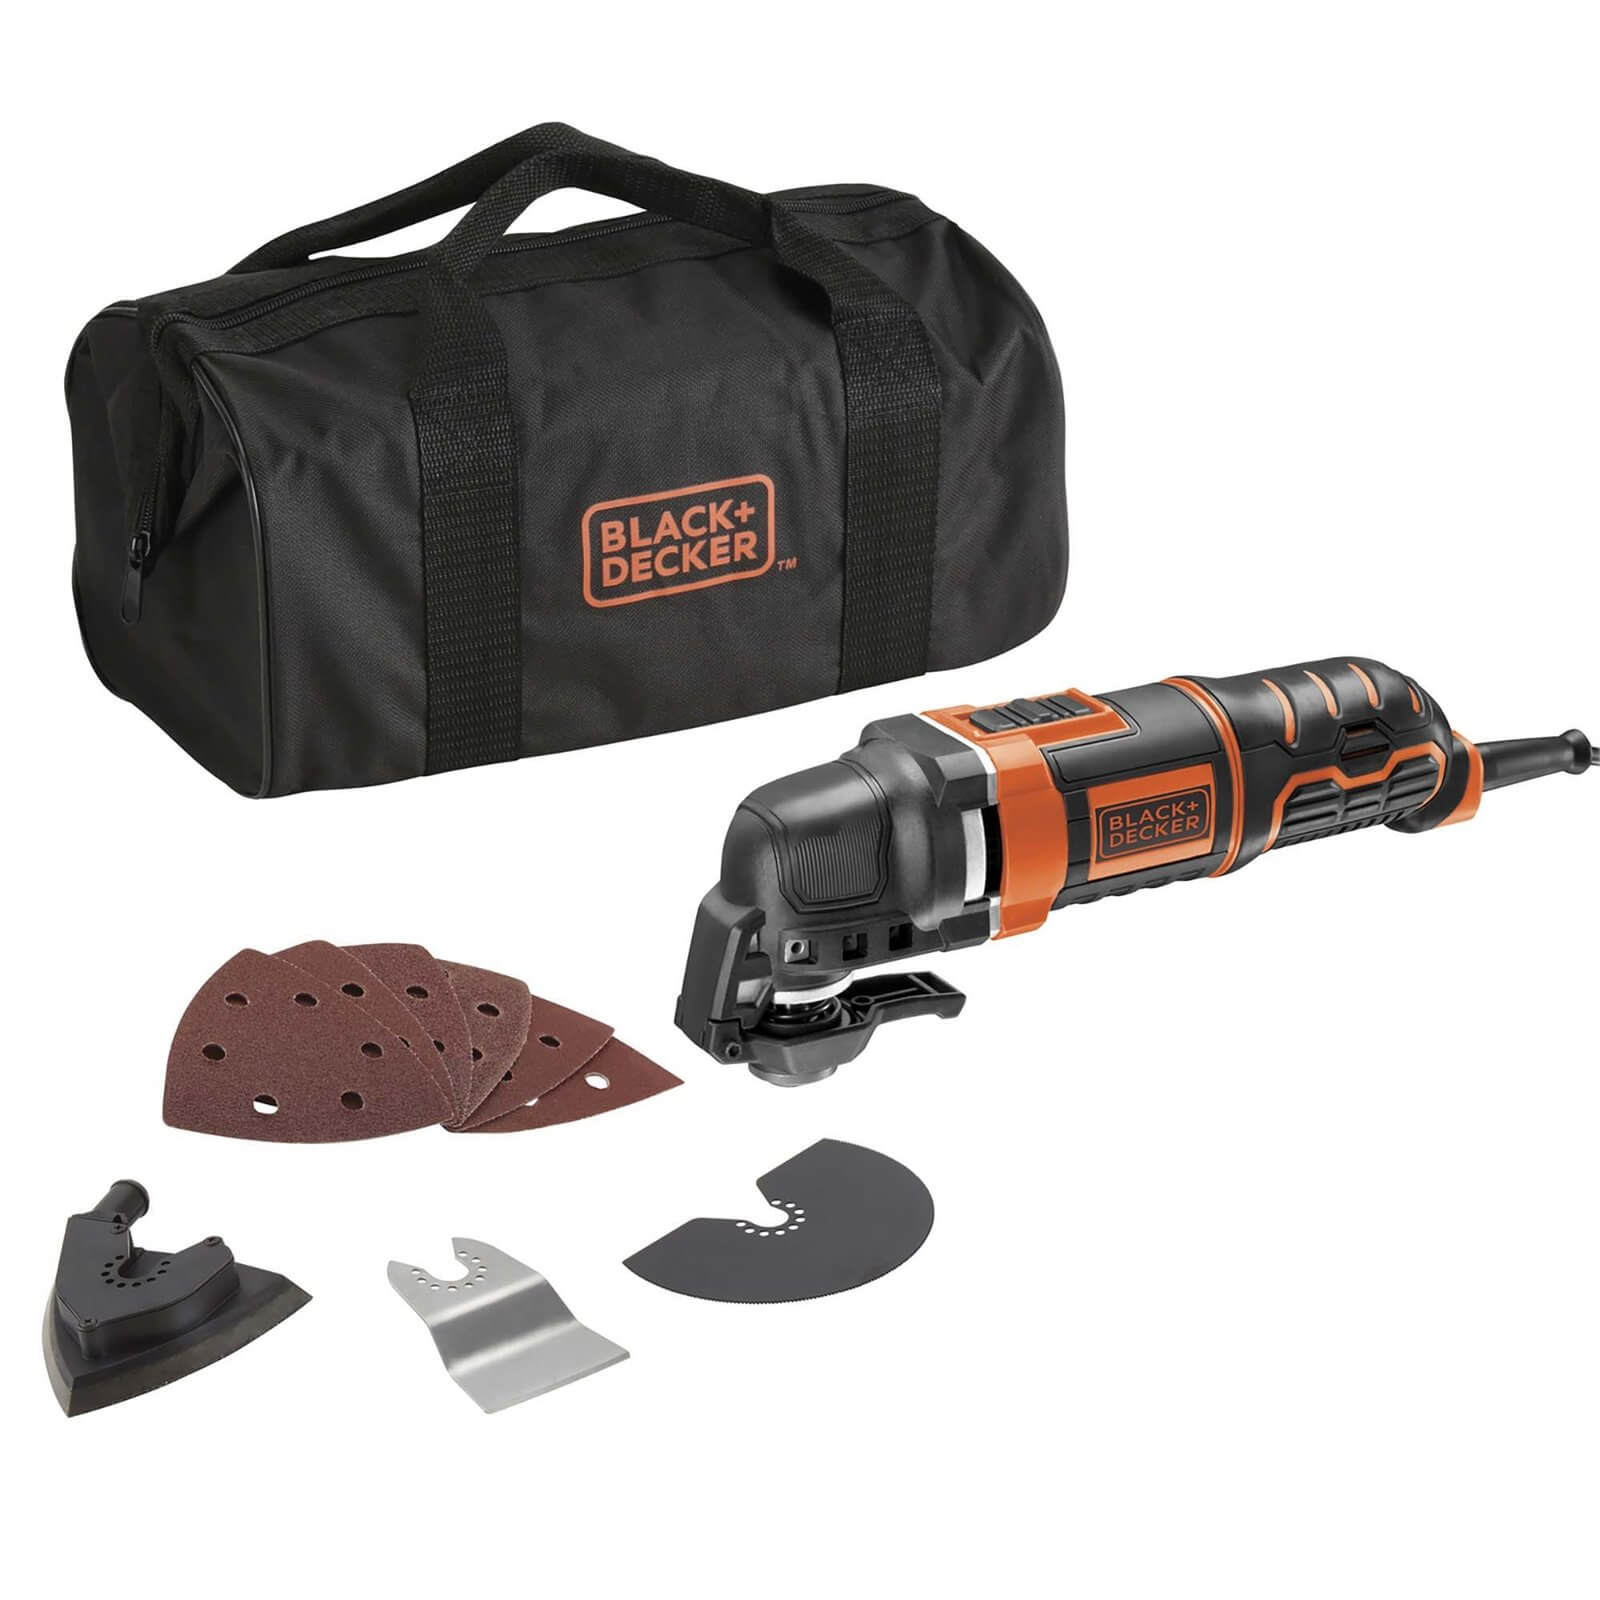 BLACK+DECKER 280W Corded Multi-Purpose Tool with 10 Accessories and Storage Bag (MT280BA-GB)